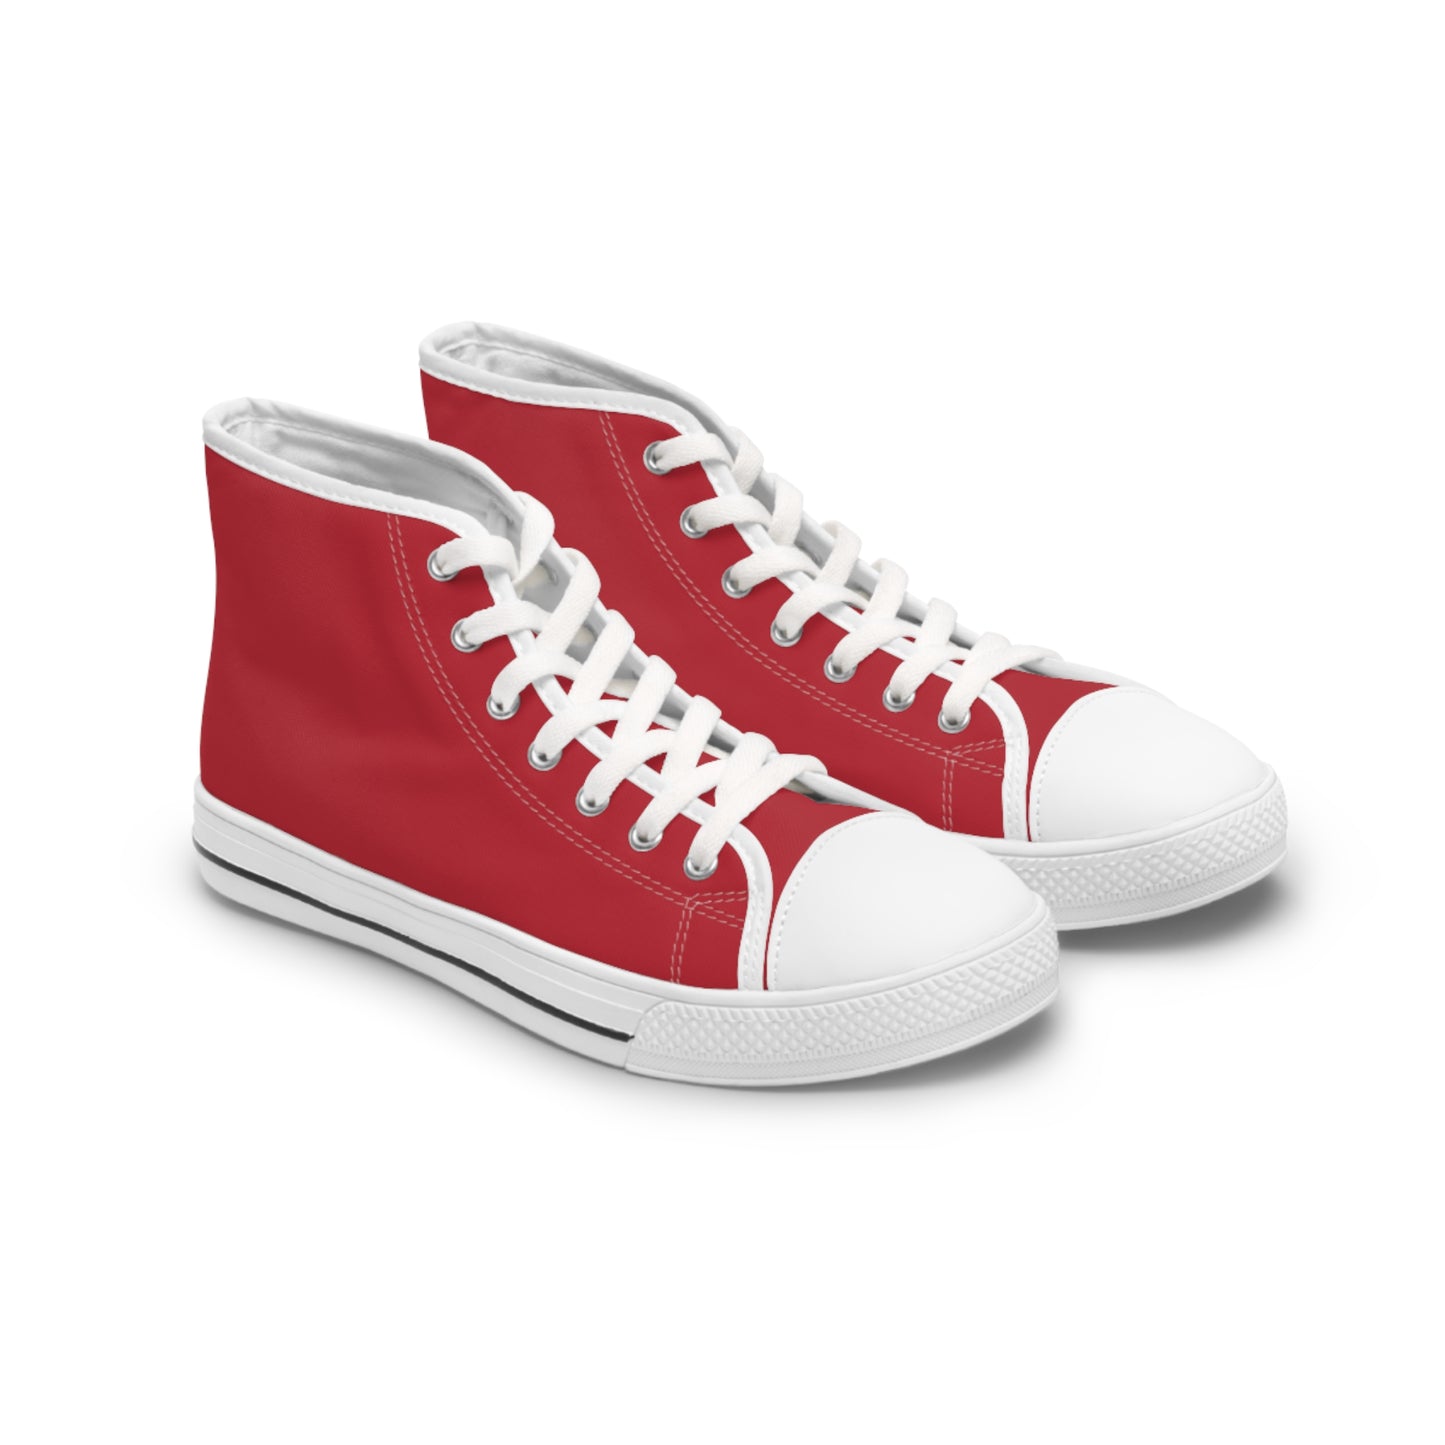 Women's High Top Sneakers - Red US 12 White sole